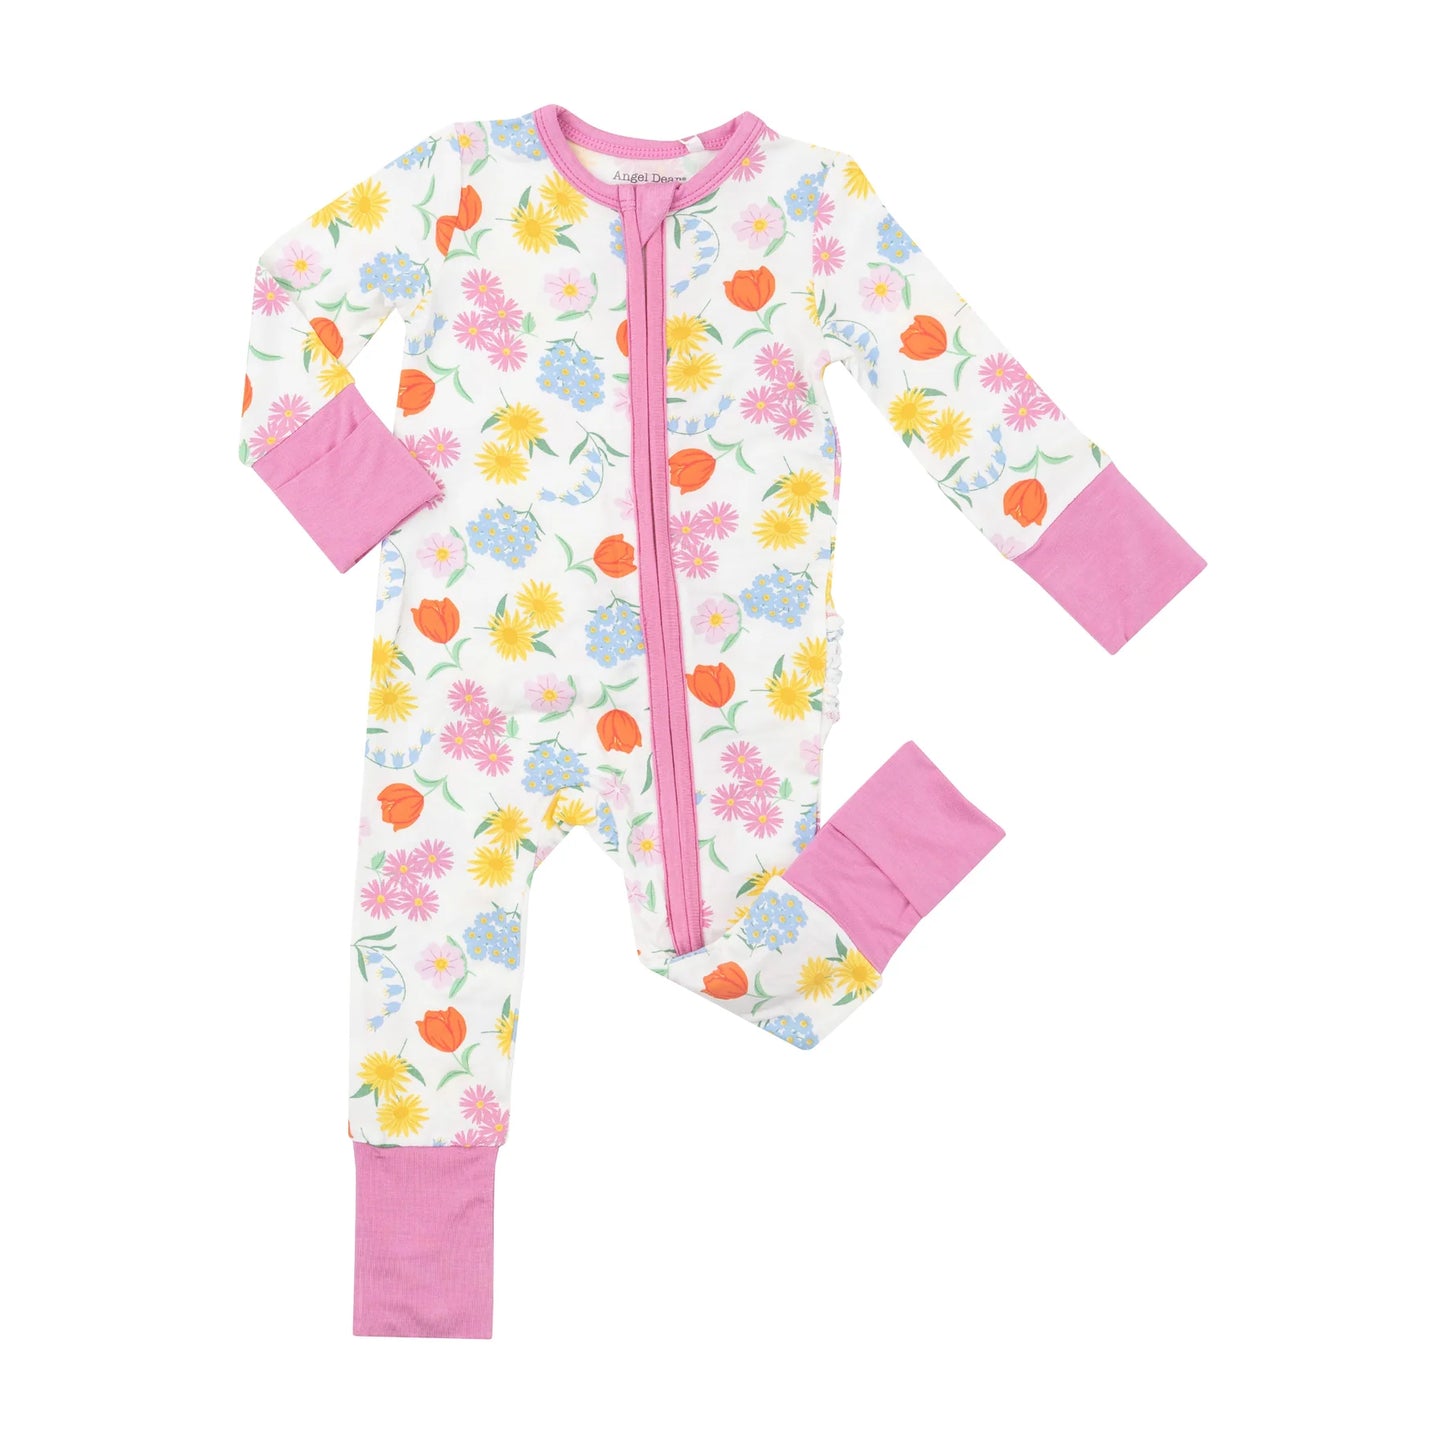 Freshly Picked Floral- Two Way Convertible Zipper Pajamas